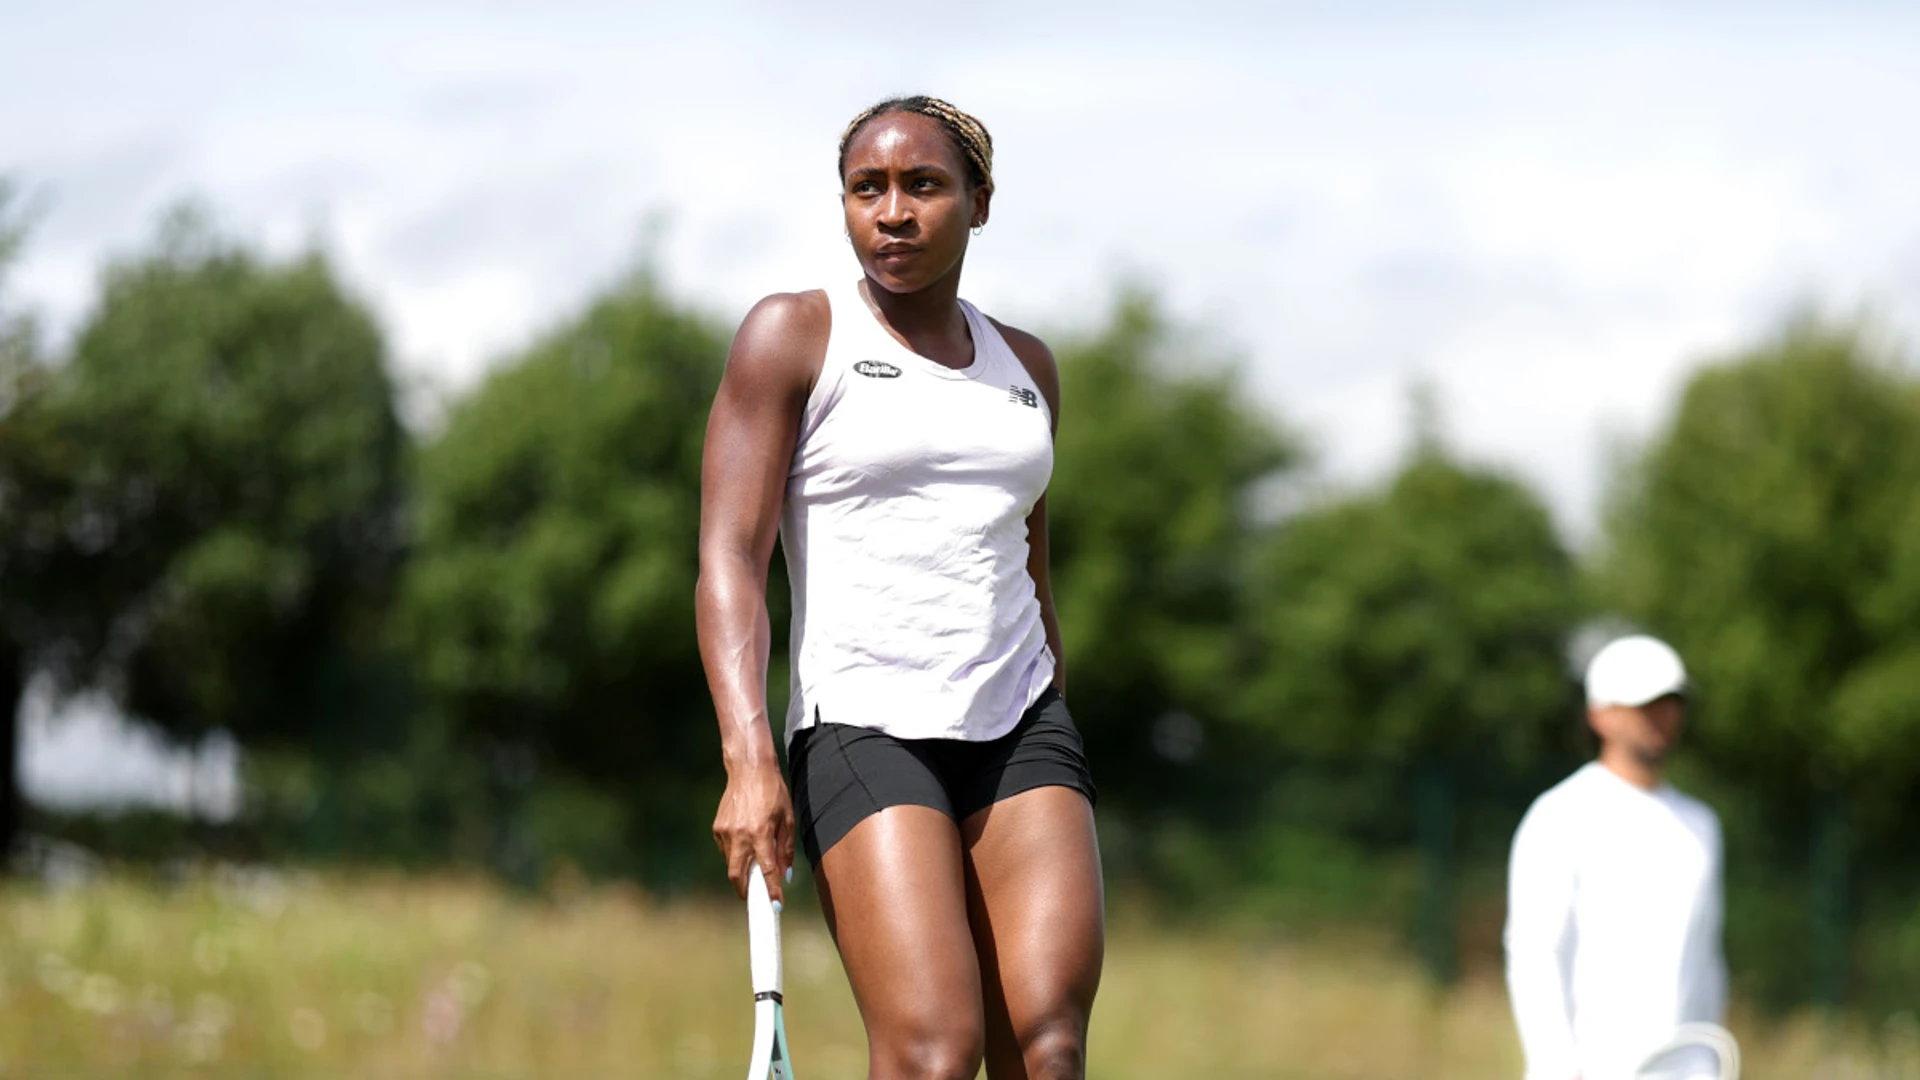 Expect the unexpected as Gauff gets ready to conquer Wimbledon